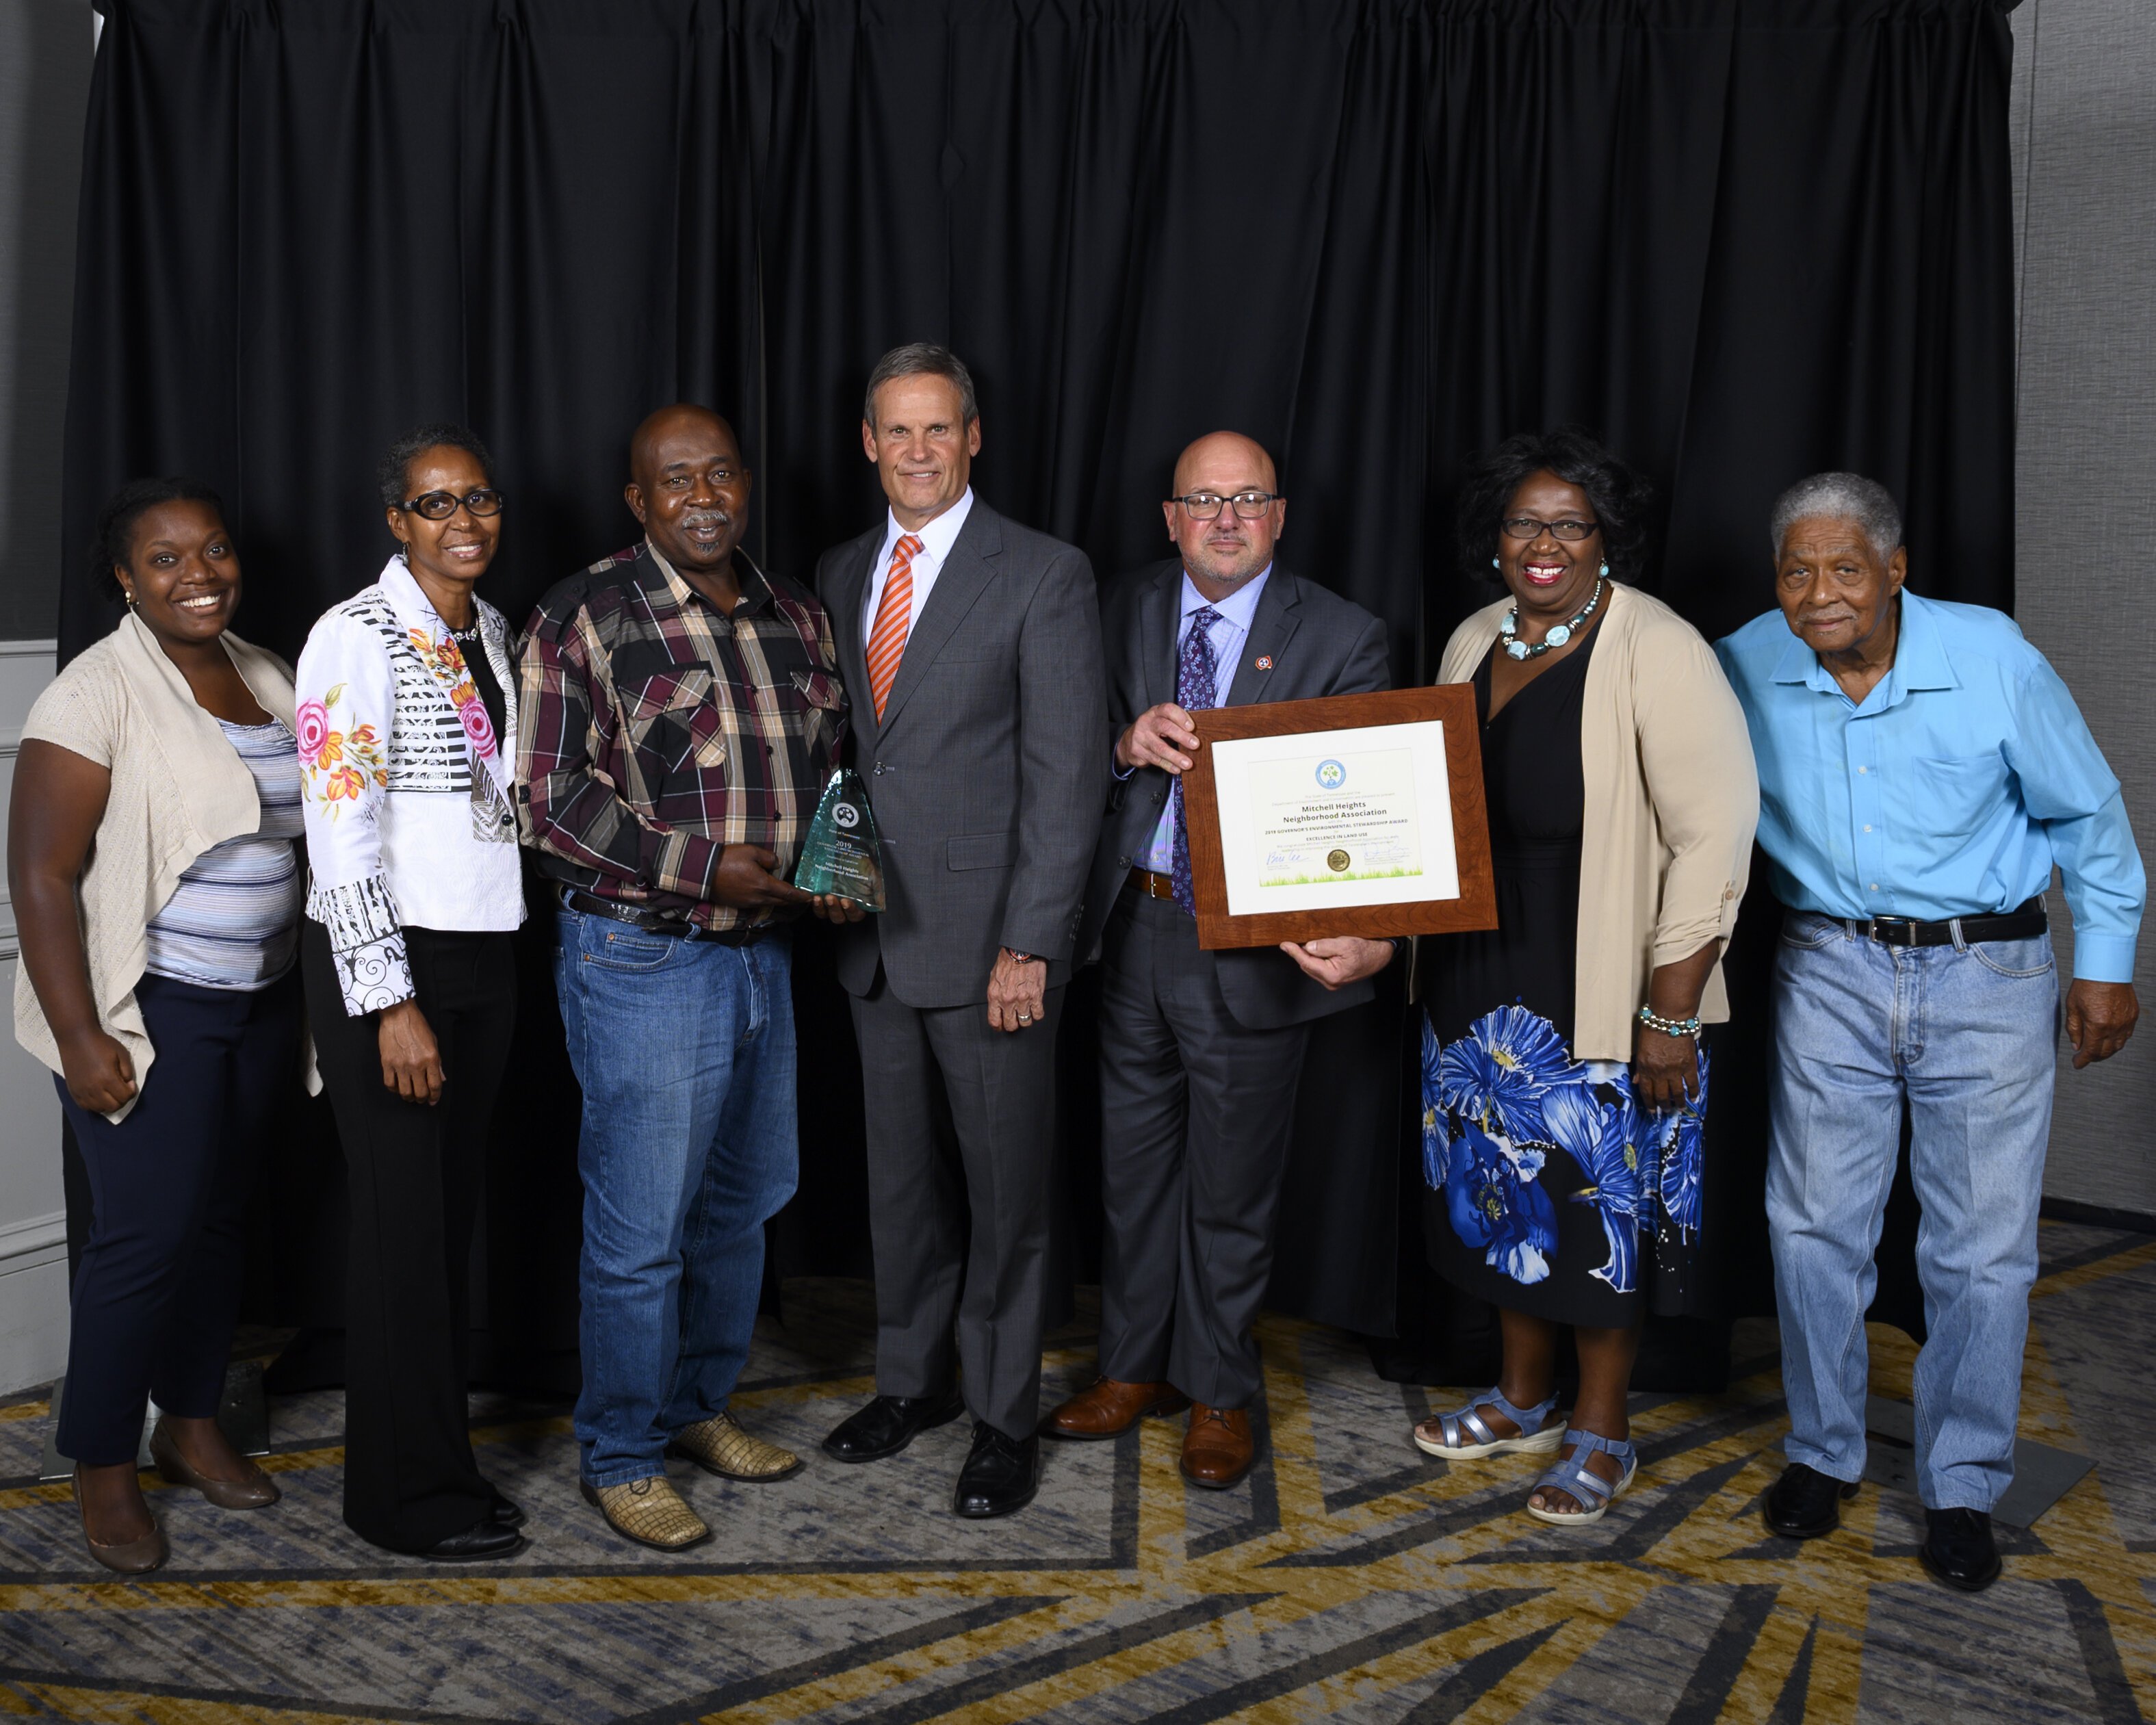 Members of the Mitchell Heights Neighborhood Association were presented with the 2019 Tennessee Governor's Award for Environmental Stewardship by Governor Bill Lee (center) in Nashville on August 1. (TN Green Gov)